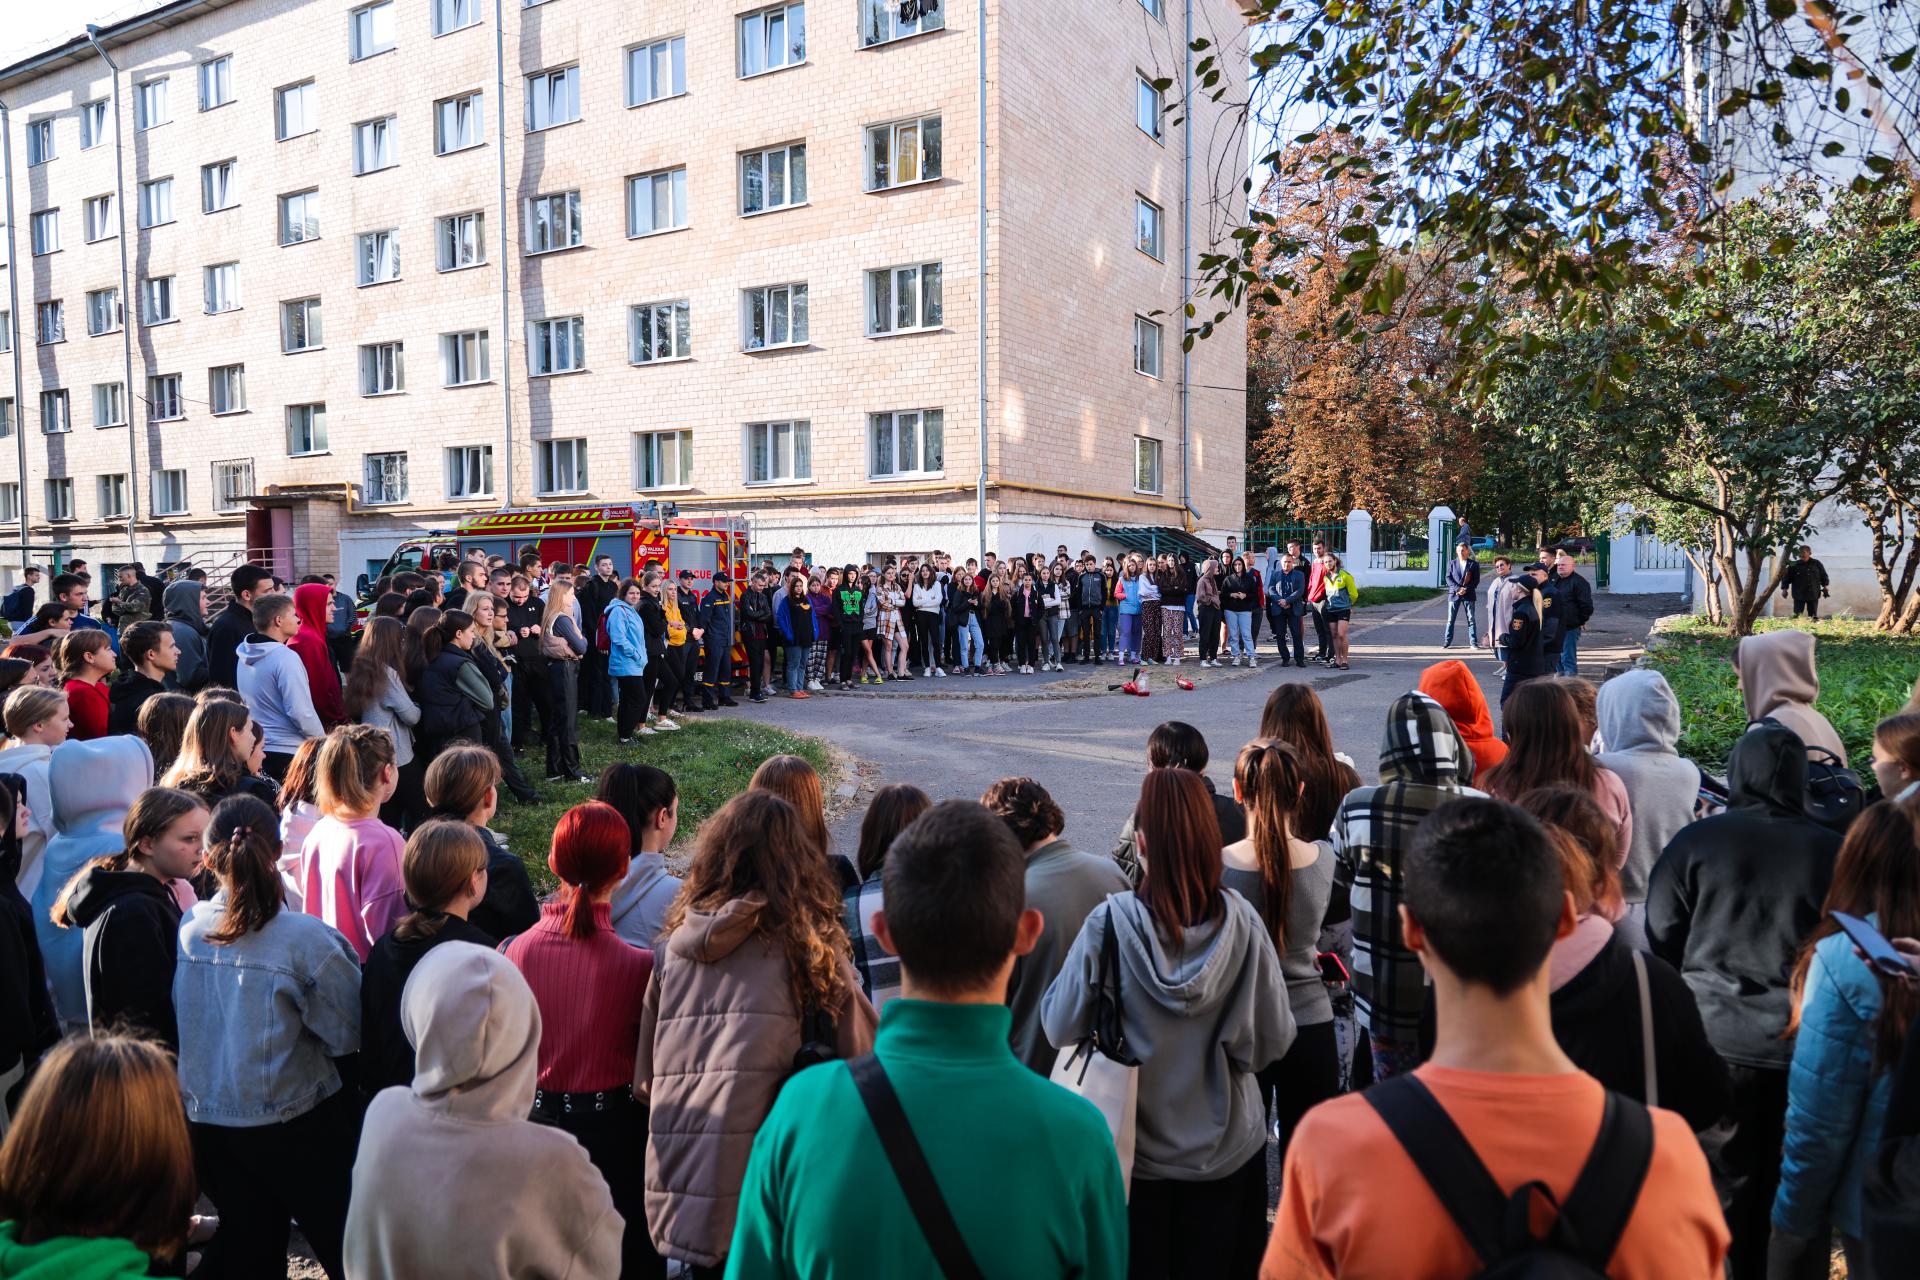 Poltava rescuers conduct object training on fire safety in the campus